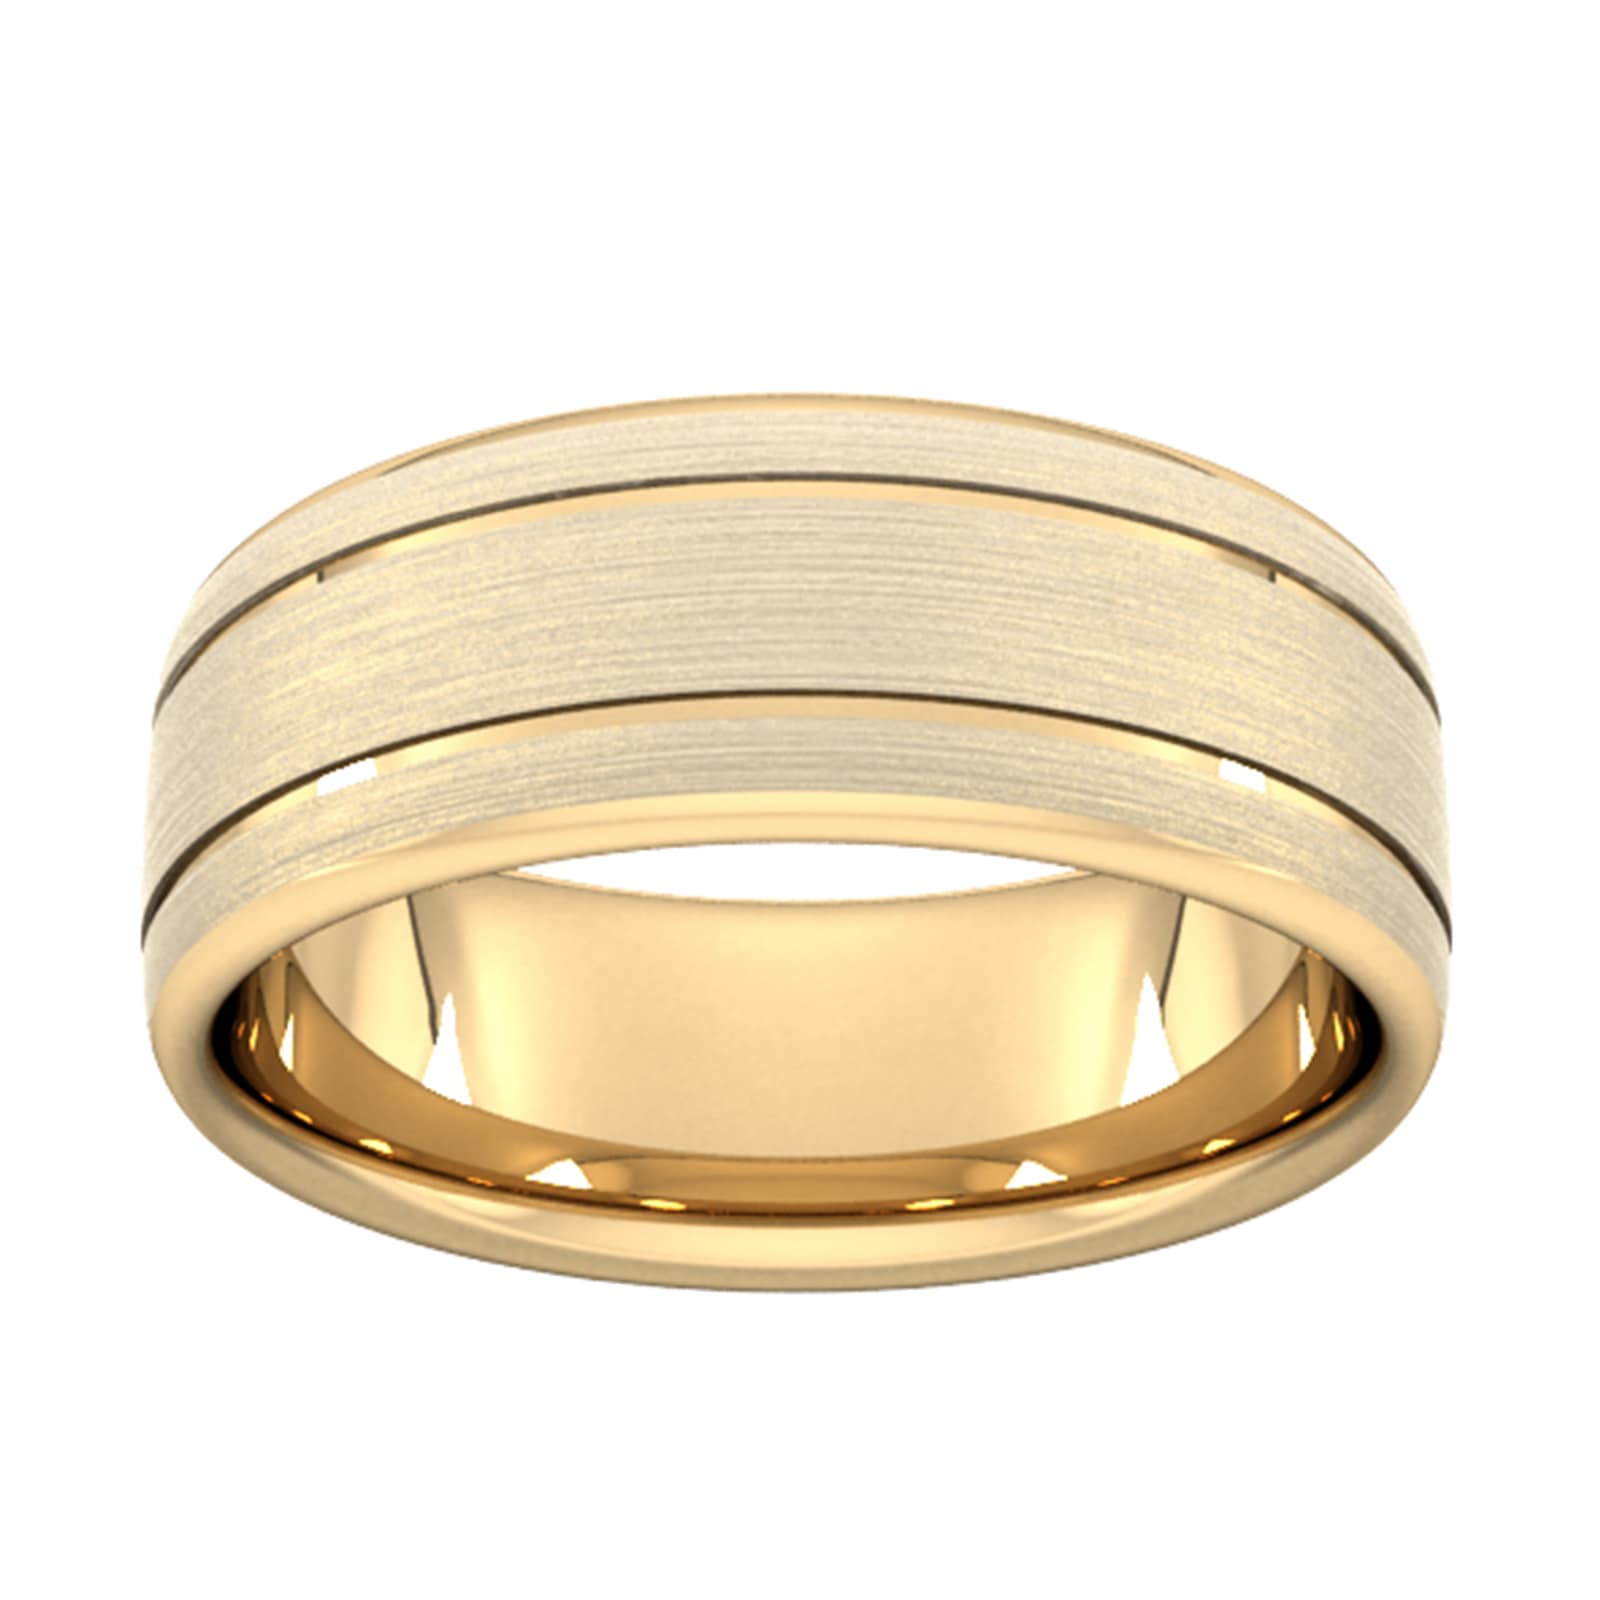 8mm Traditional Court Standard Matt Finish With Double Grooves Wedding Ring In 18 Carat Yellow Gold - Ring Size T